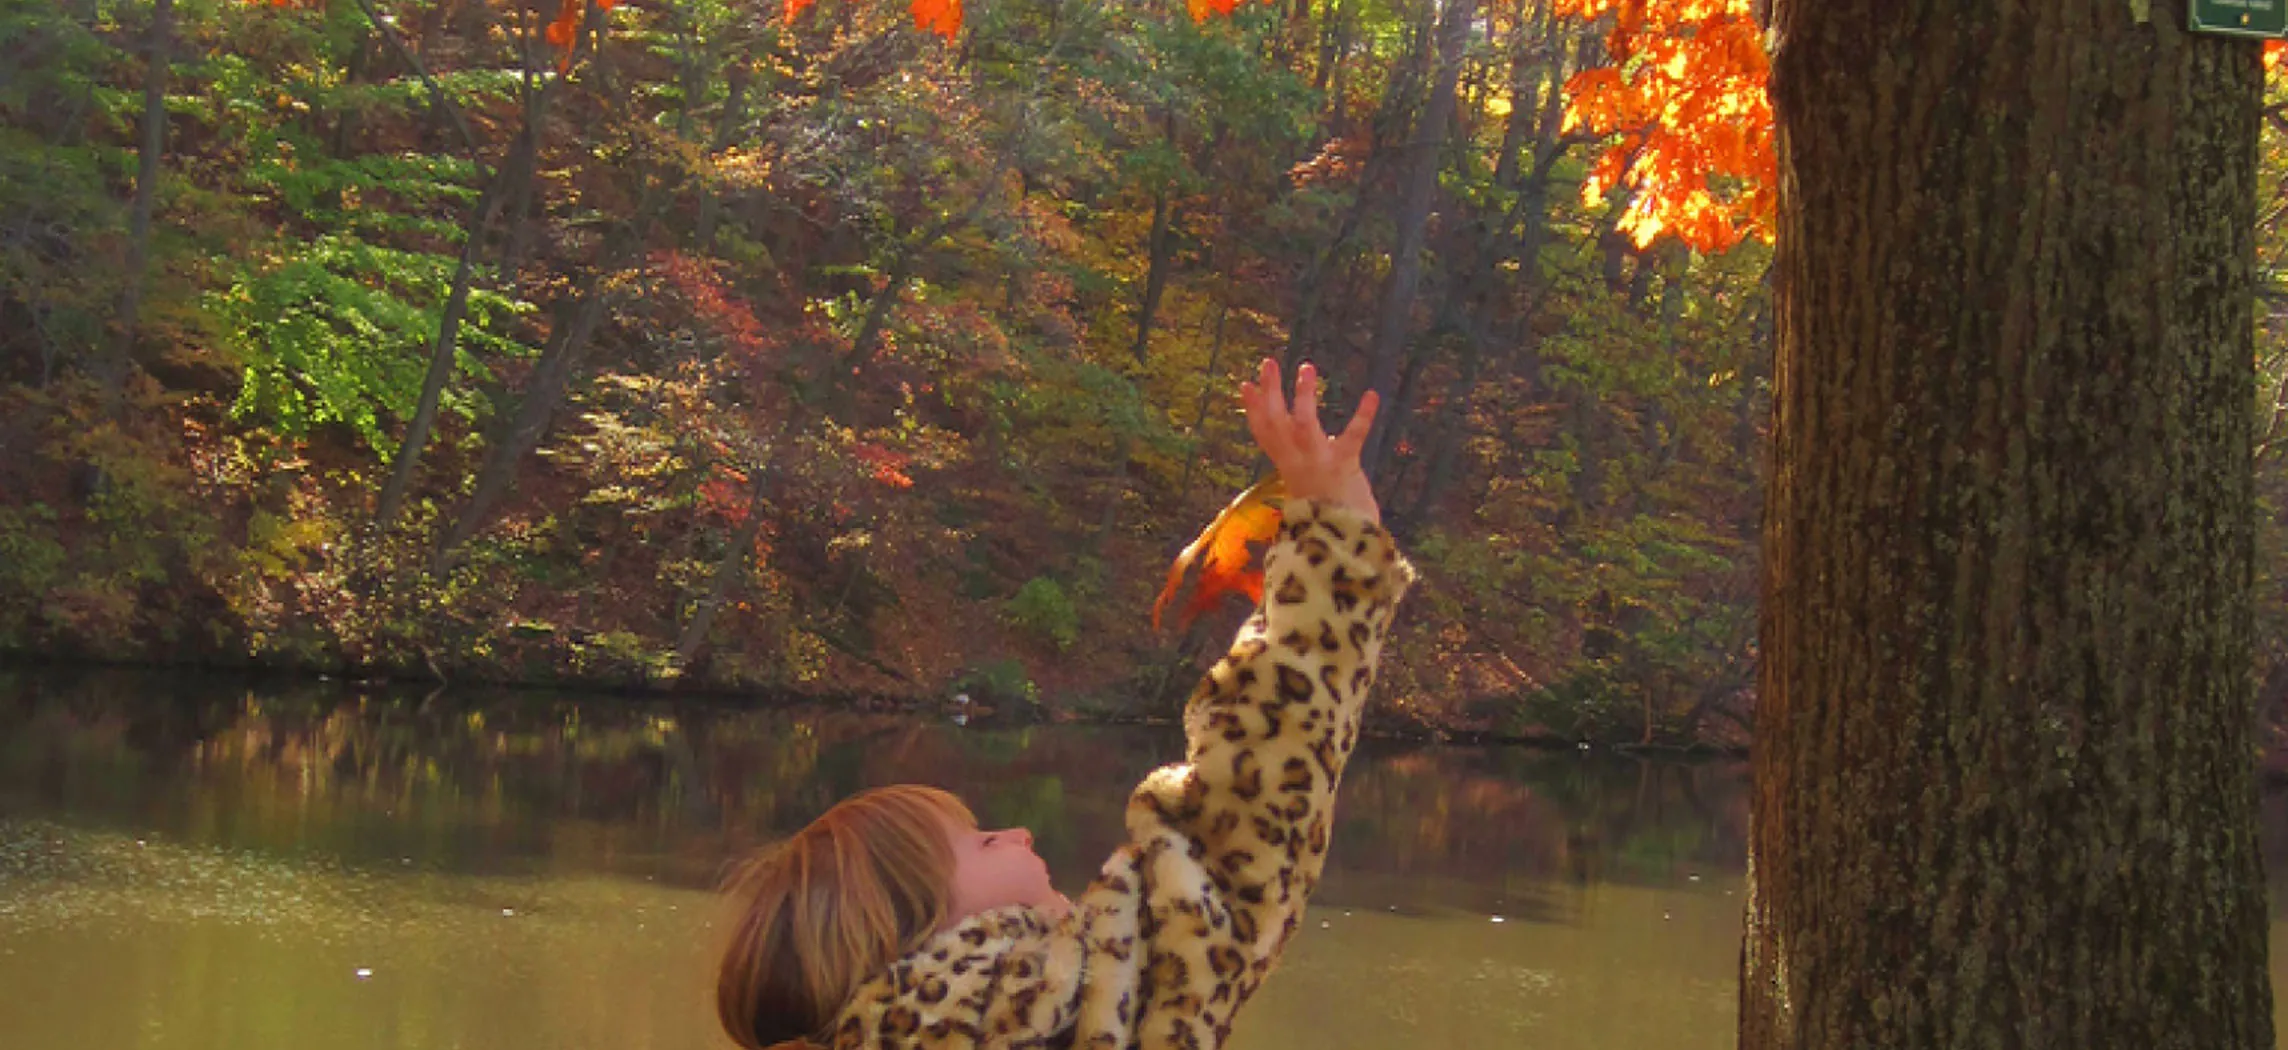 This photo shows a young girl reaching for an orange leaf on an oak tree. She is on a walkway near a creek. The opposite shore is a deep slope covered with more trees in autumn colors.